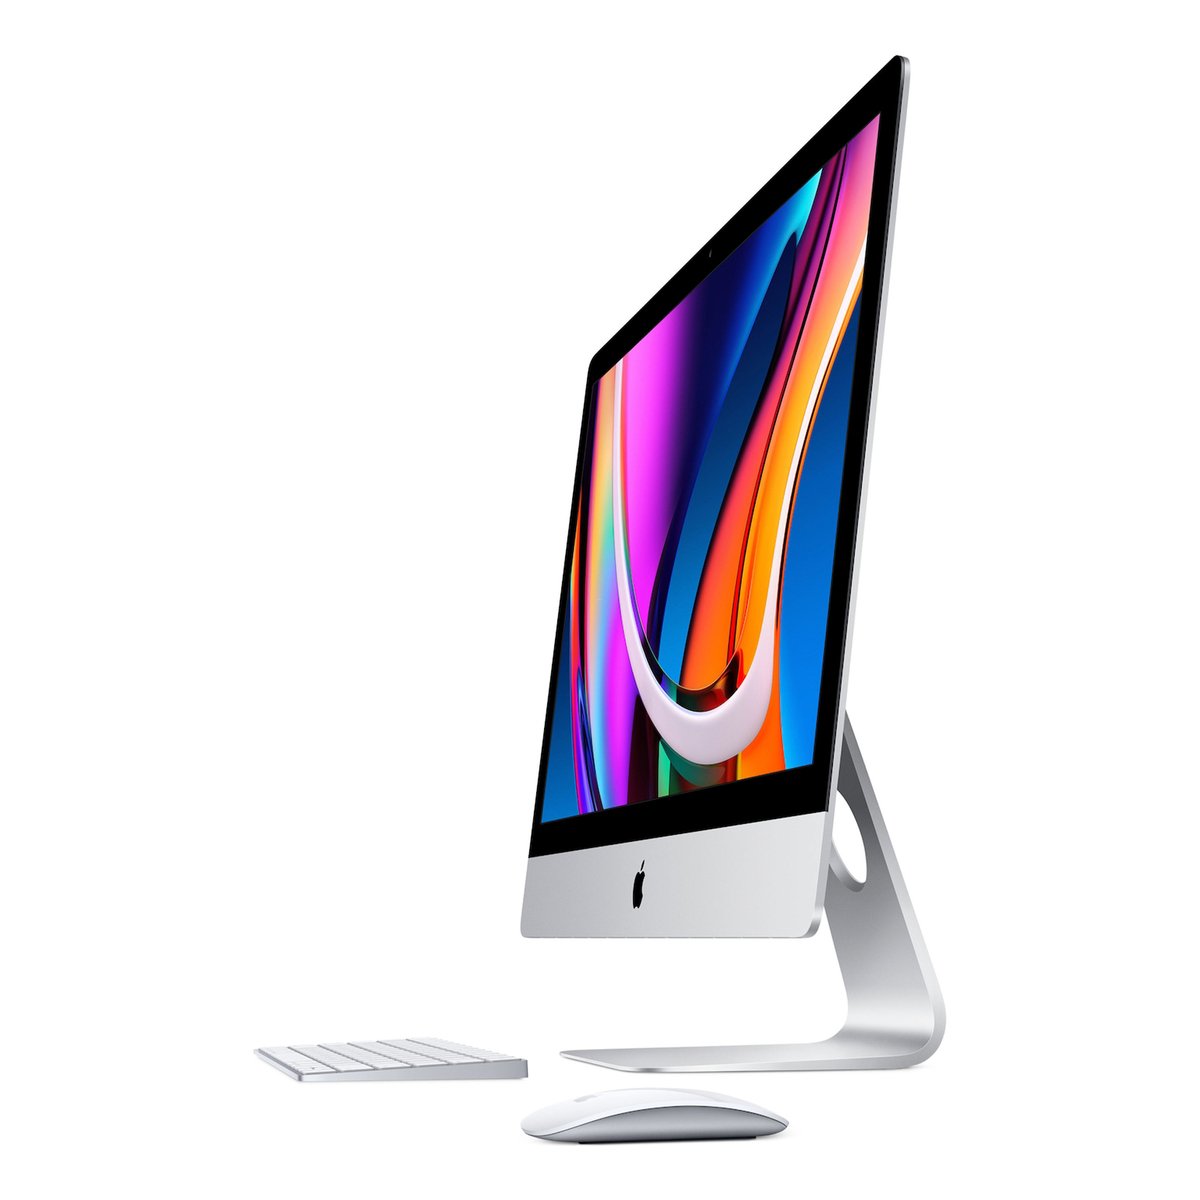 Apple iMac  The all-in-one for all (MXWV2AB/A)27 inch,3.8GHz 6-core 10th-generation Intel Core i5 processor,512 GB,8GBRAM,Silver